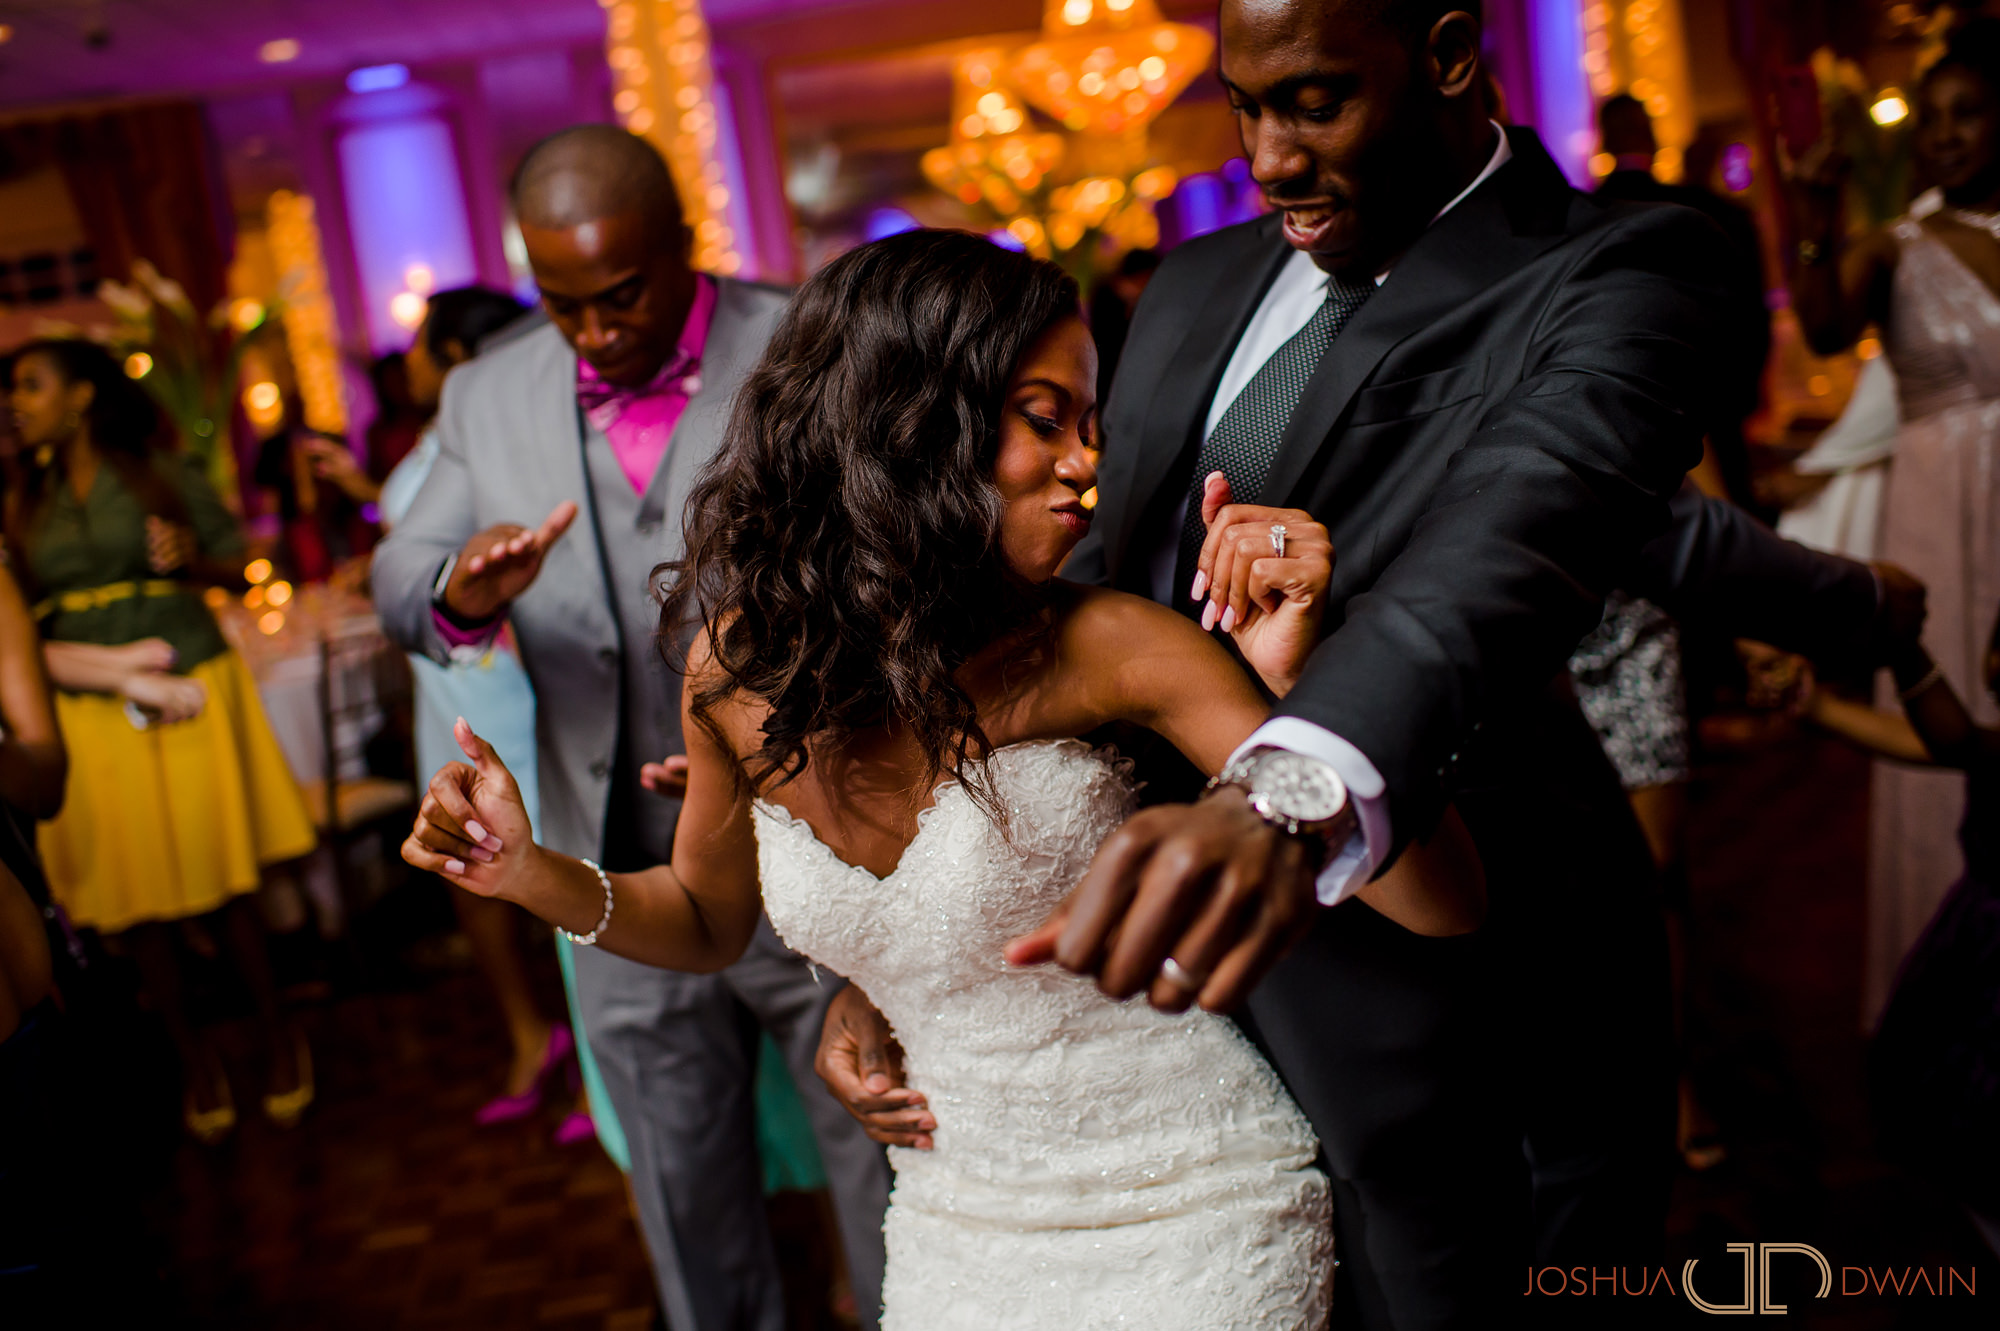 Fiona & Calvin's wedding at Atrium Country Club in New Jersey